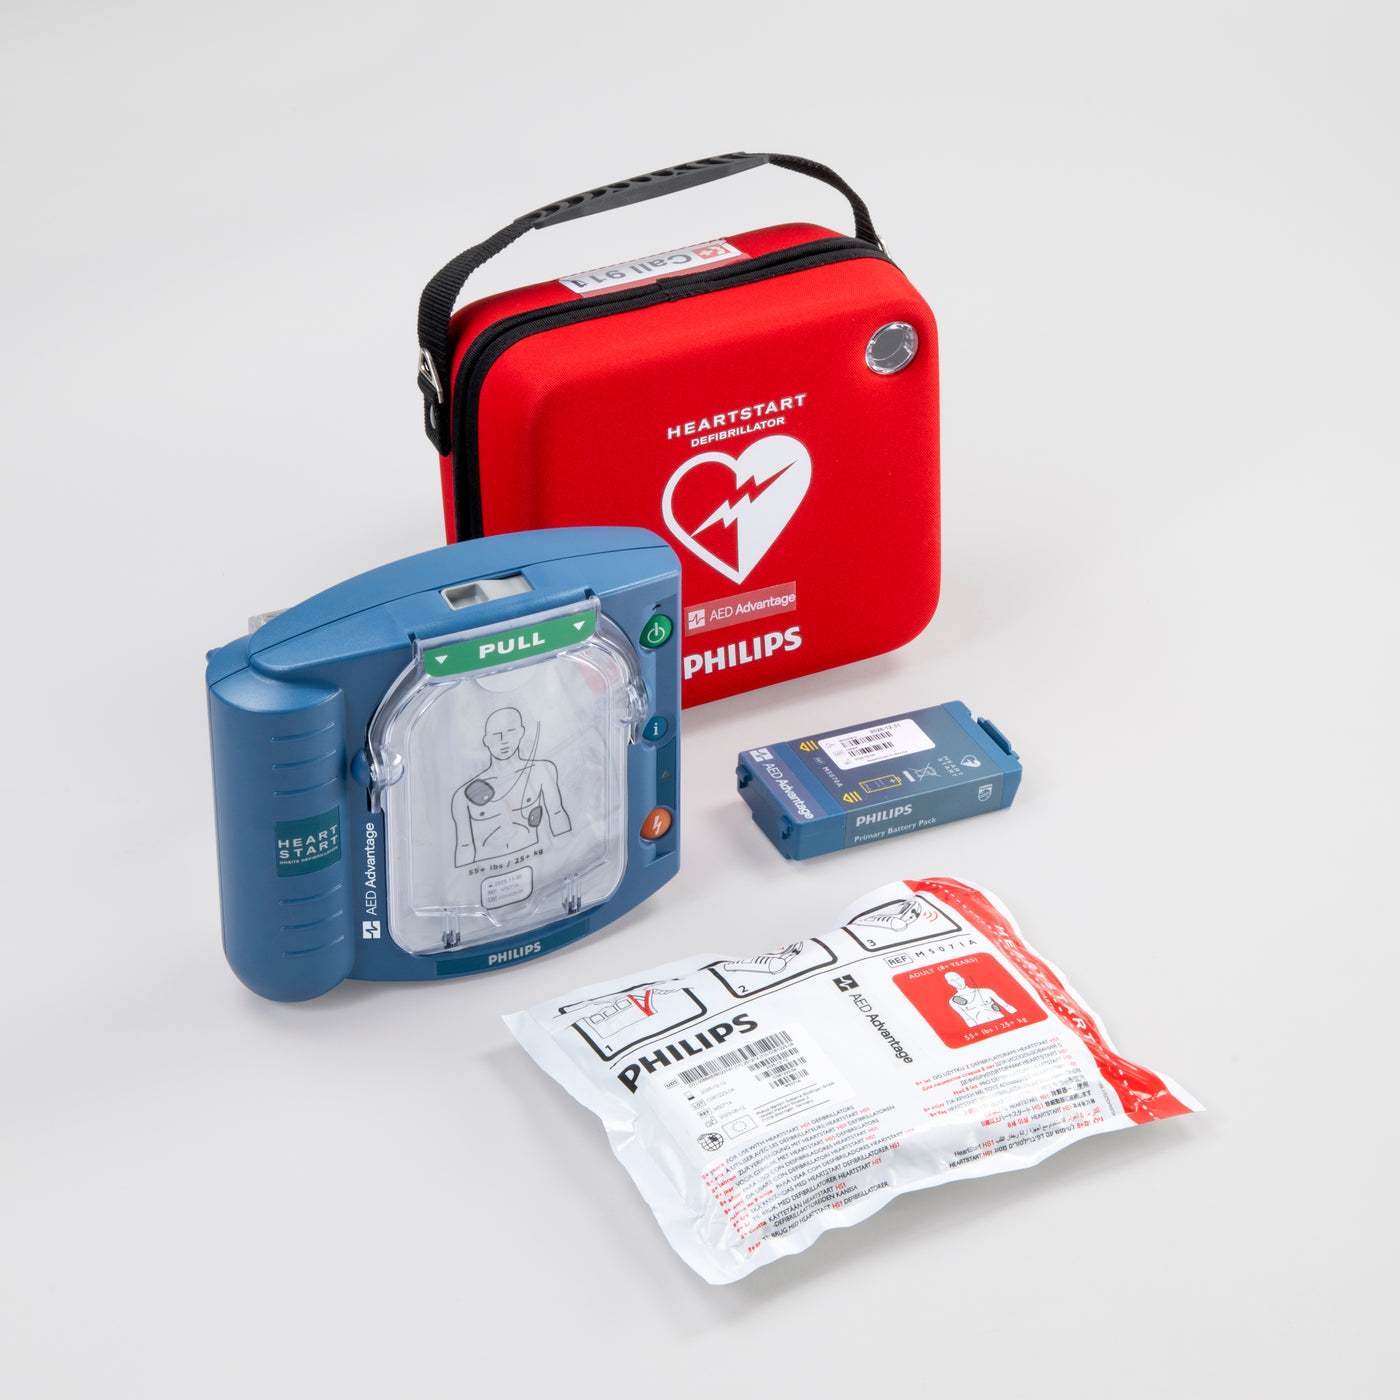 A Philips OnSite AED displayed with its bright red carry case, electrode pads, and battery.